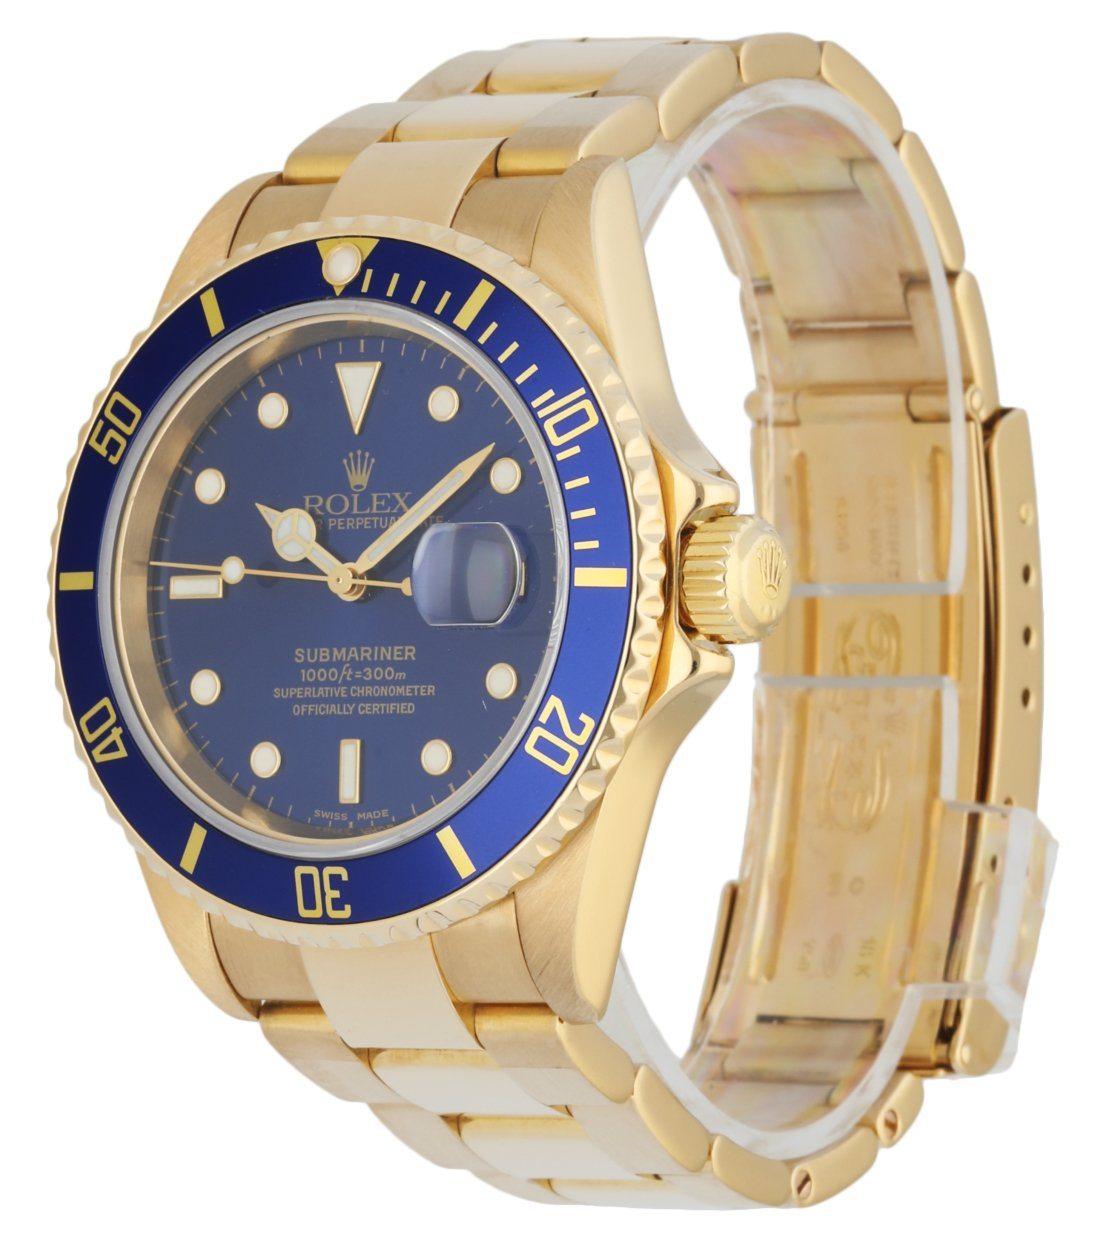 Rolex Submariner 16618 Men's Watch. 40mm 18K yellow gold case with 18K yellow gold unidirectional rotating bezel with blue bezel insert. Blue dial with luminous gold hands and dot hour markers. Date display at the 3 o'clock position. Minute markers